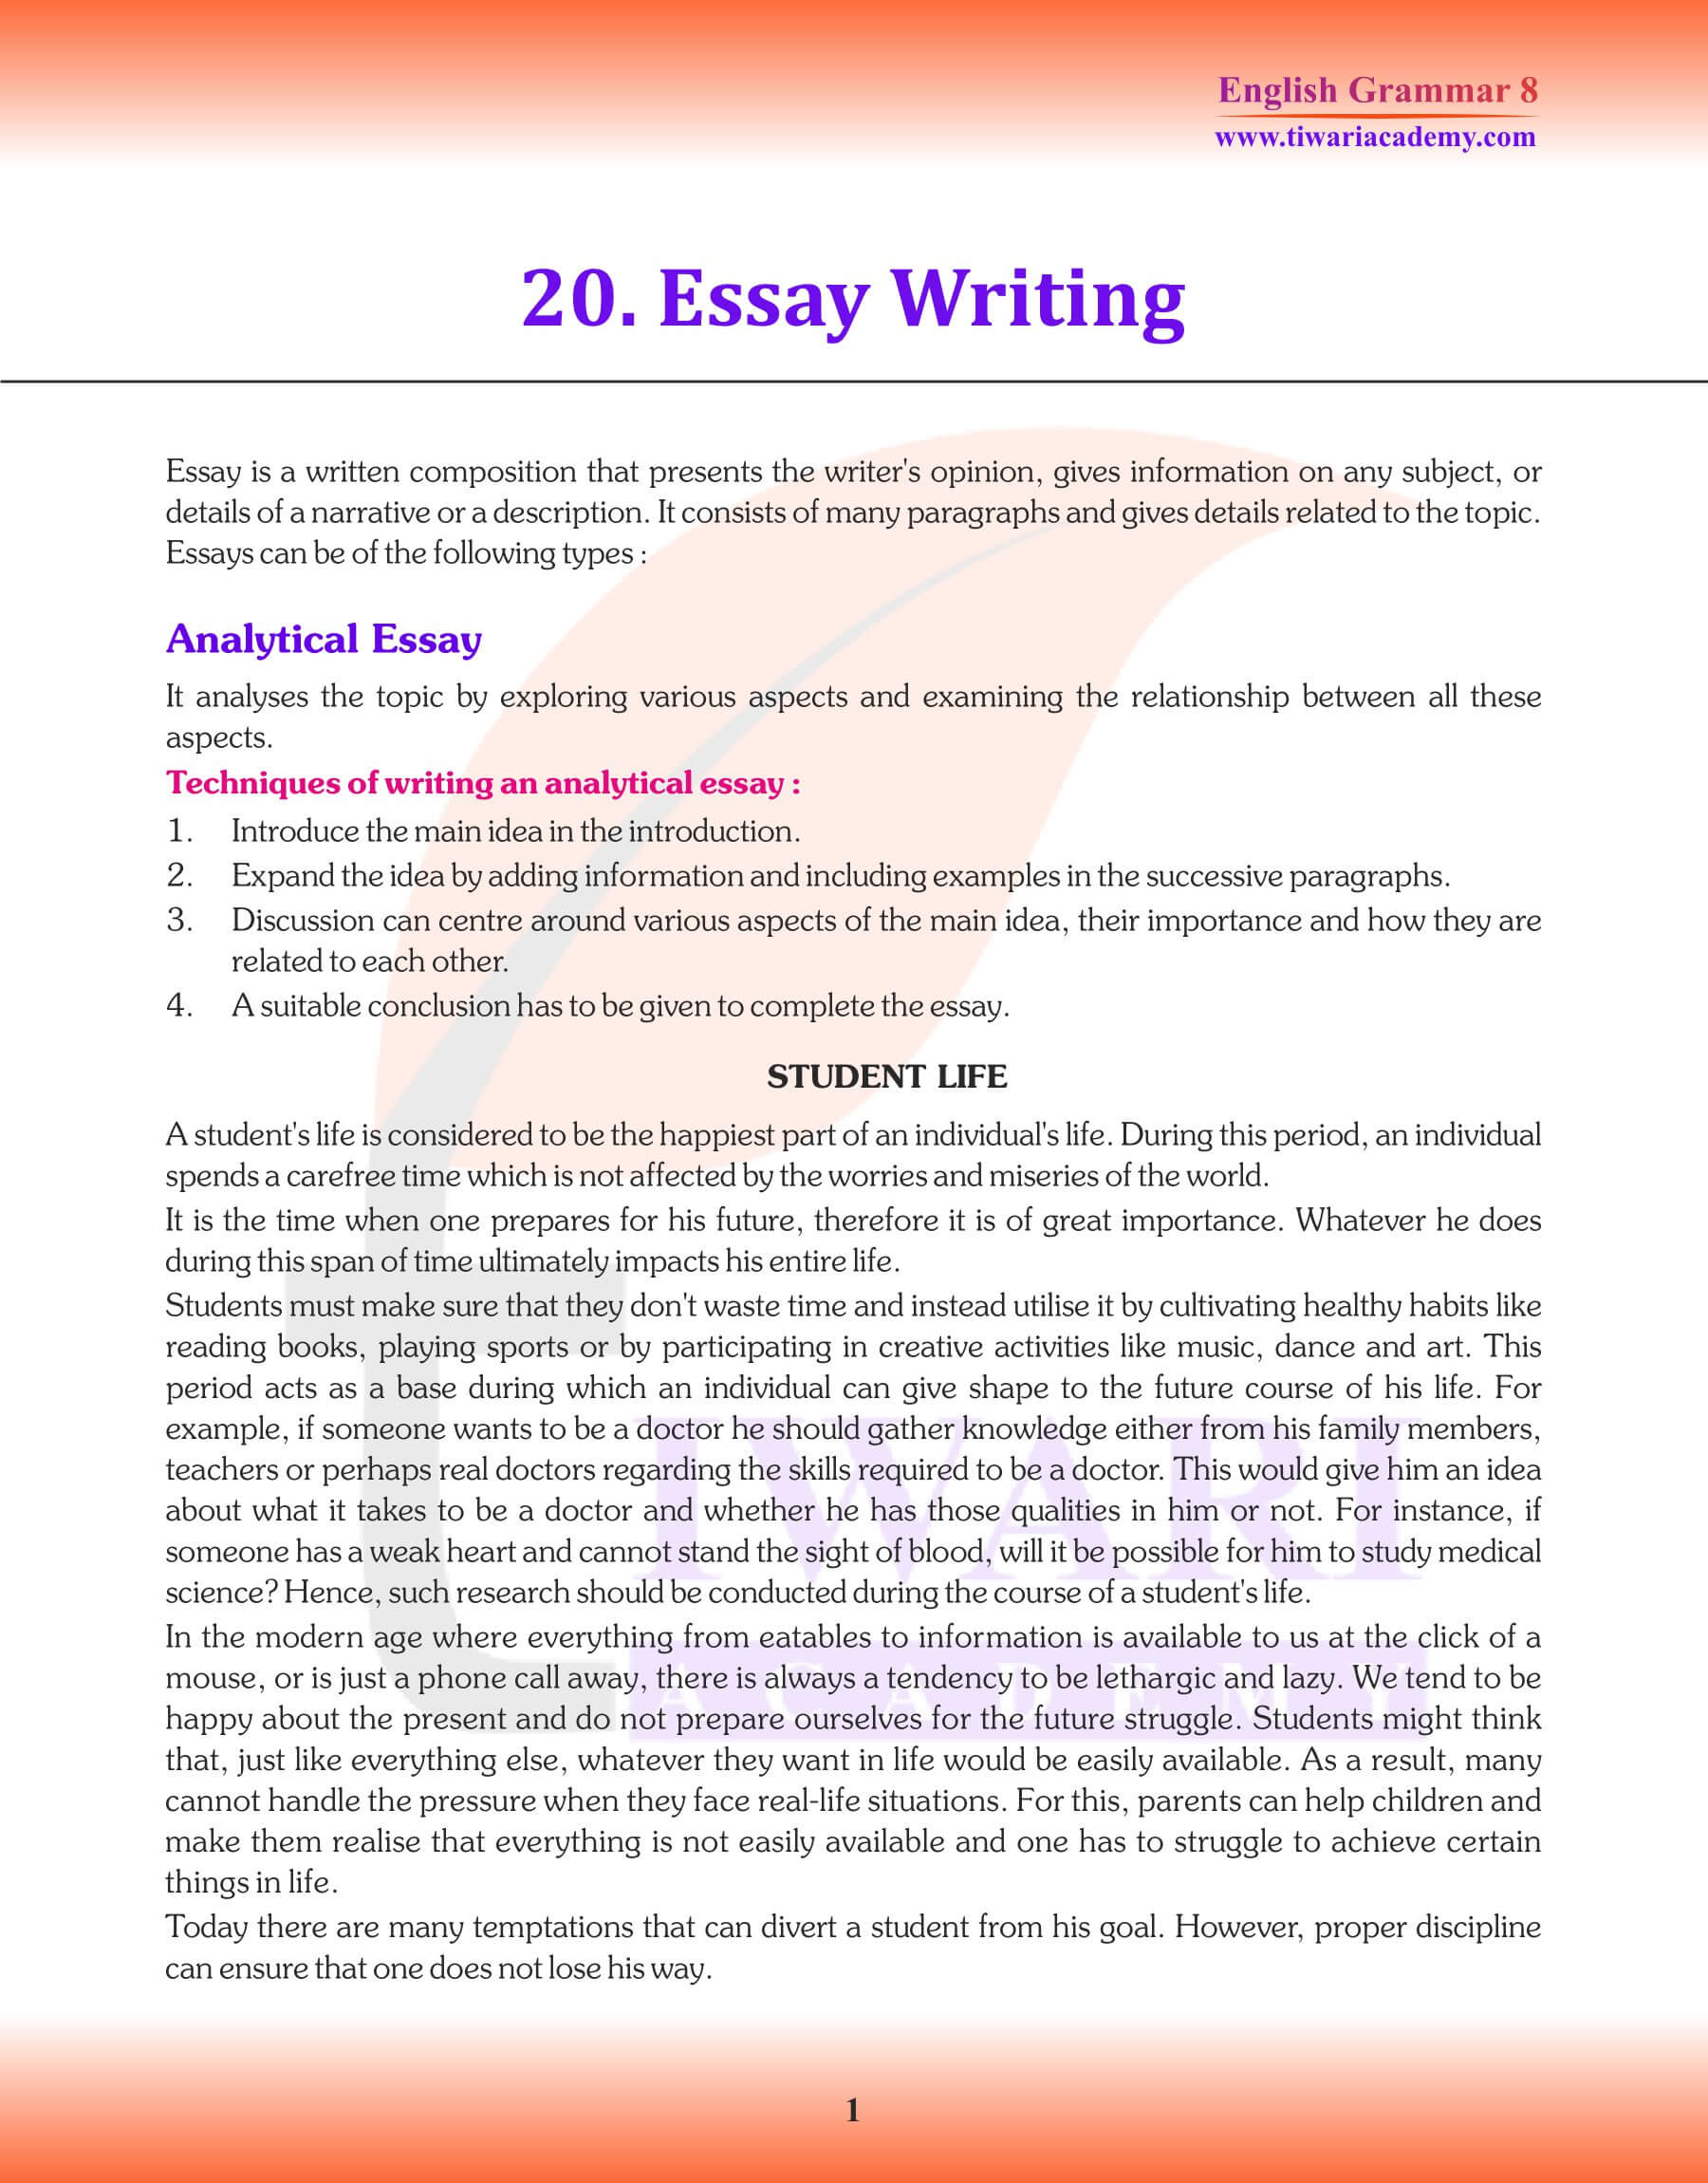 Class 8 English Grammar Chapter 20 Essay Writing for Session 2023-24